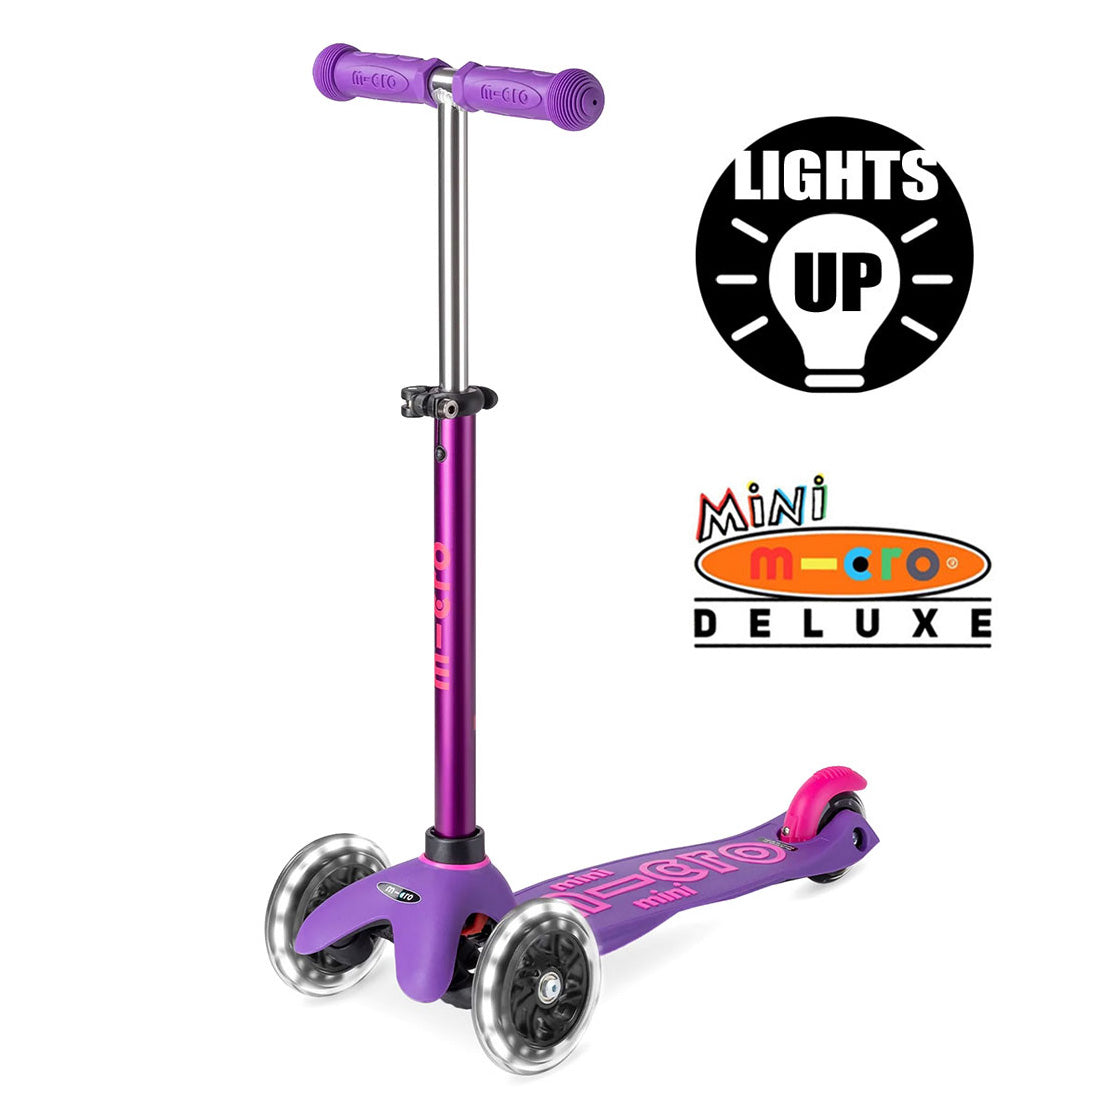 Micro Mini Deluxe LED Scooter - Purple/Pink Scooter Completes Rec